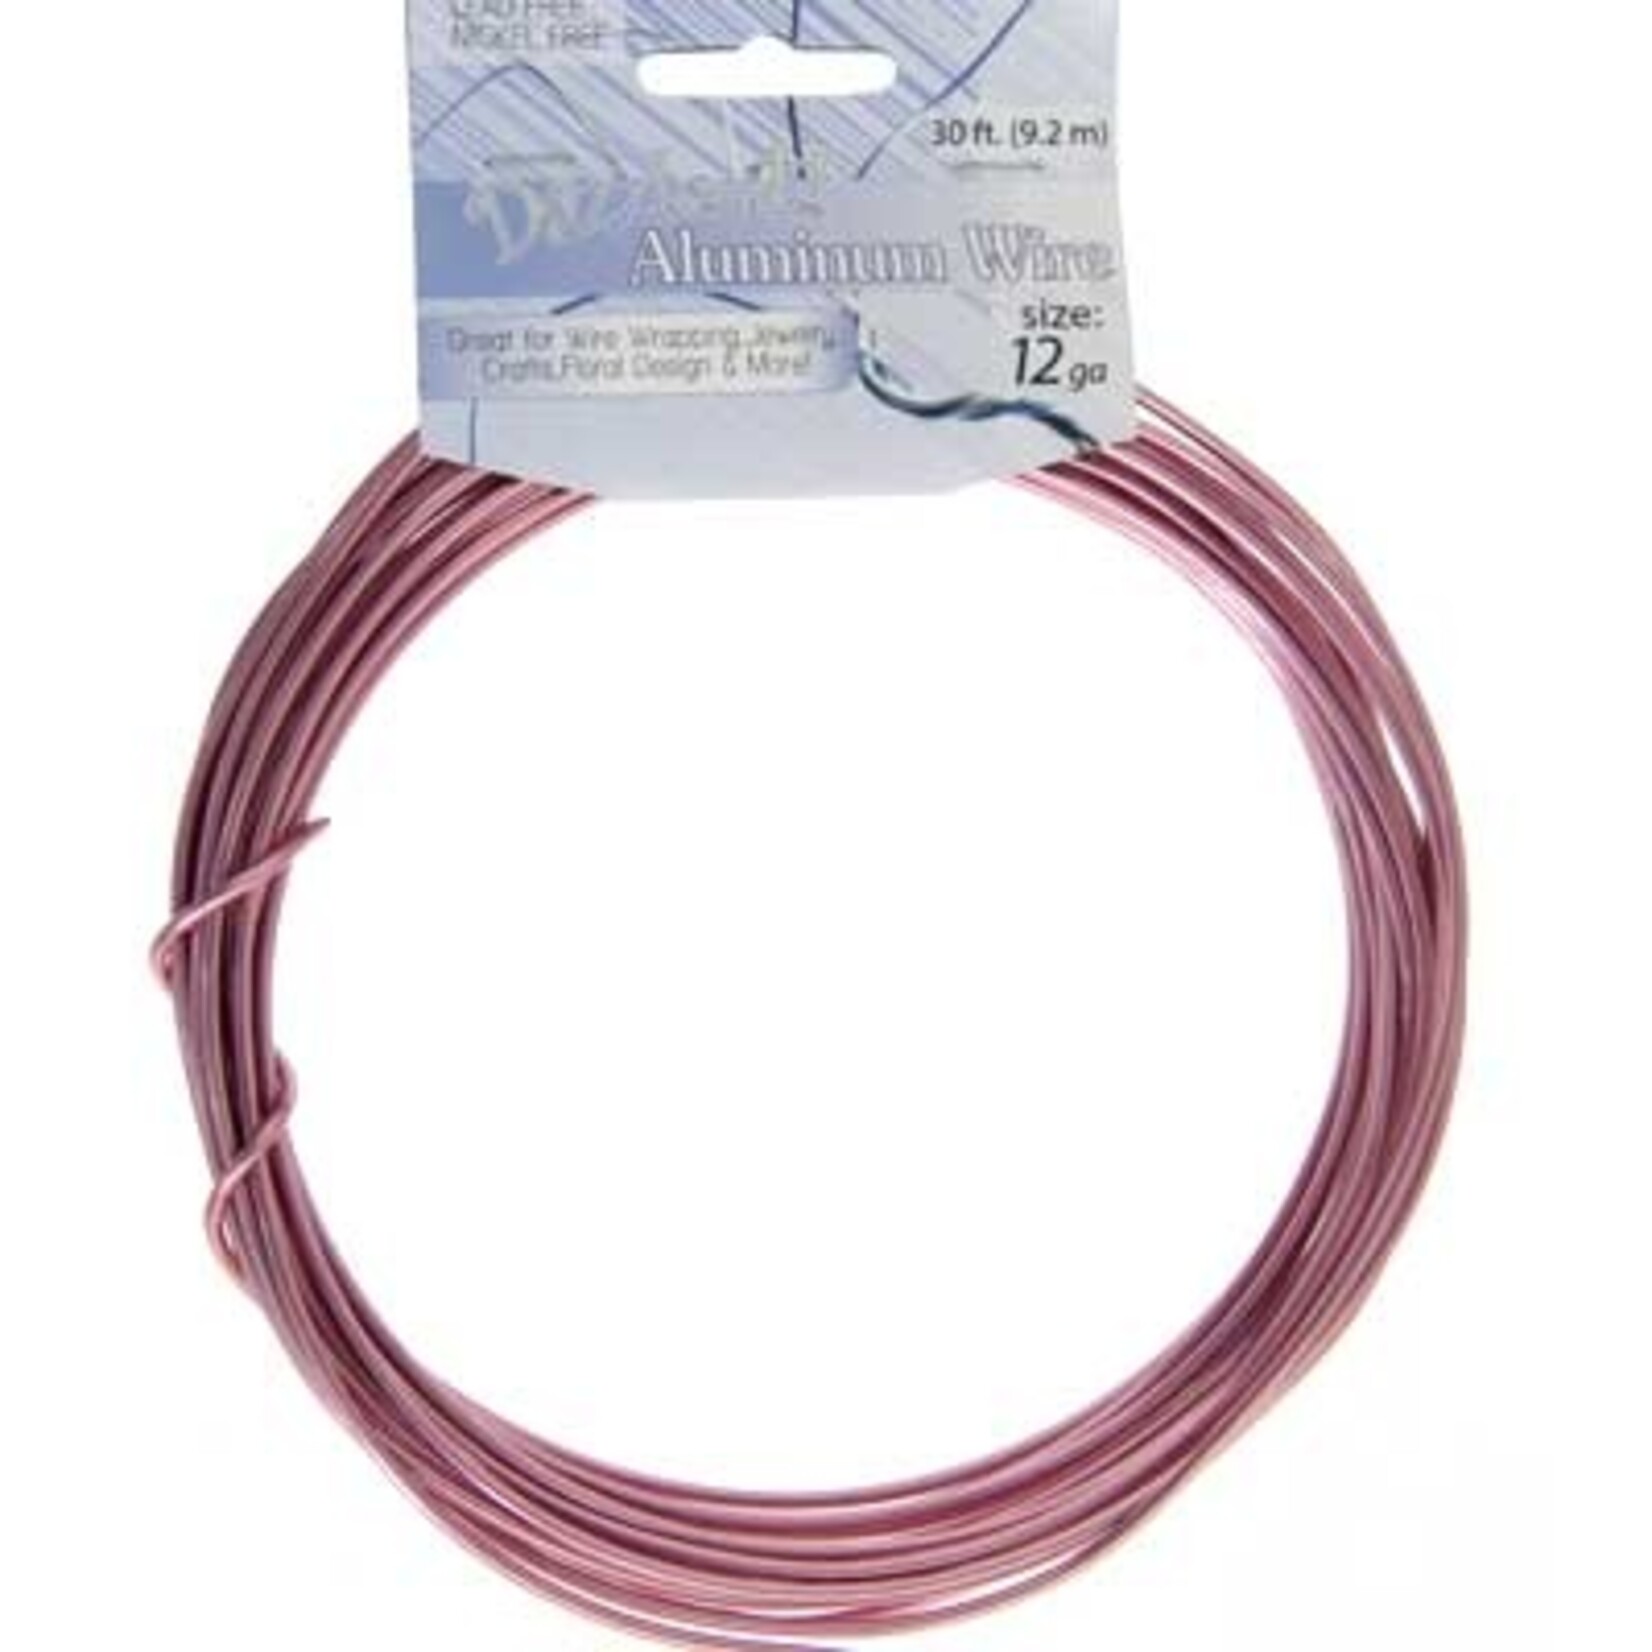 Aluminum Wire 30 Feet (9.2 meters) 12 Guage (2.5mm)